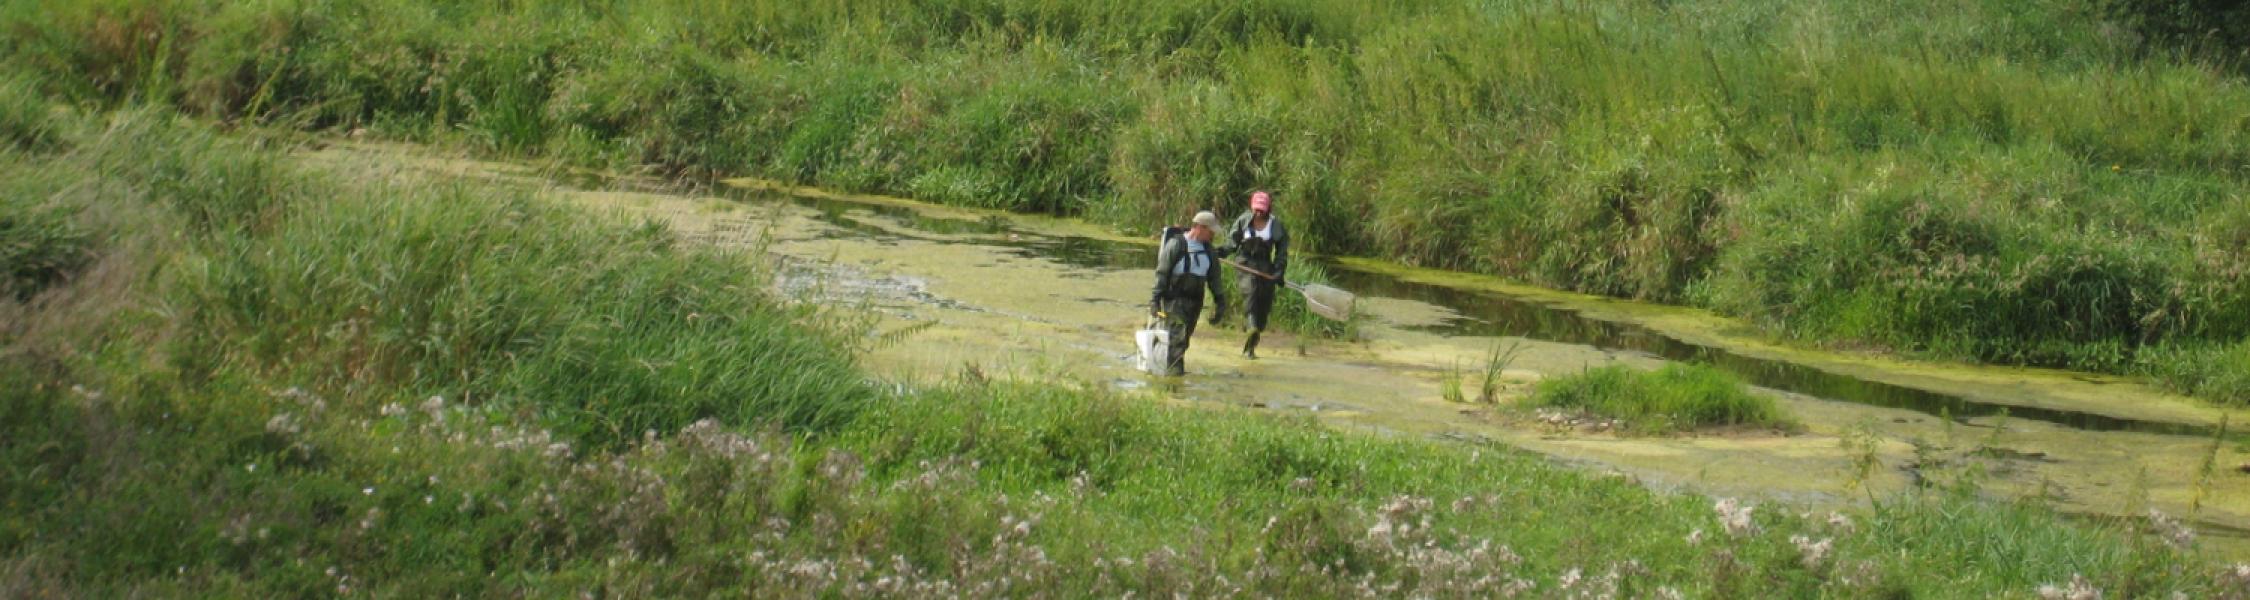 2 grad students walking through swampy wetland area wearing hip waders and carrying a net and pail